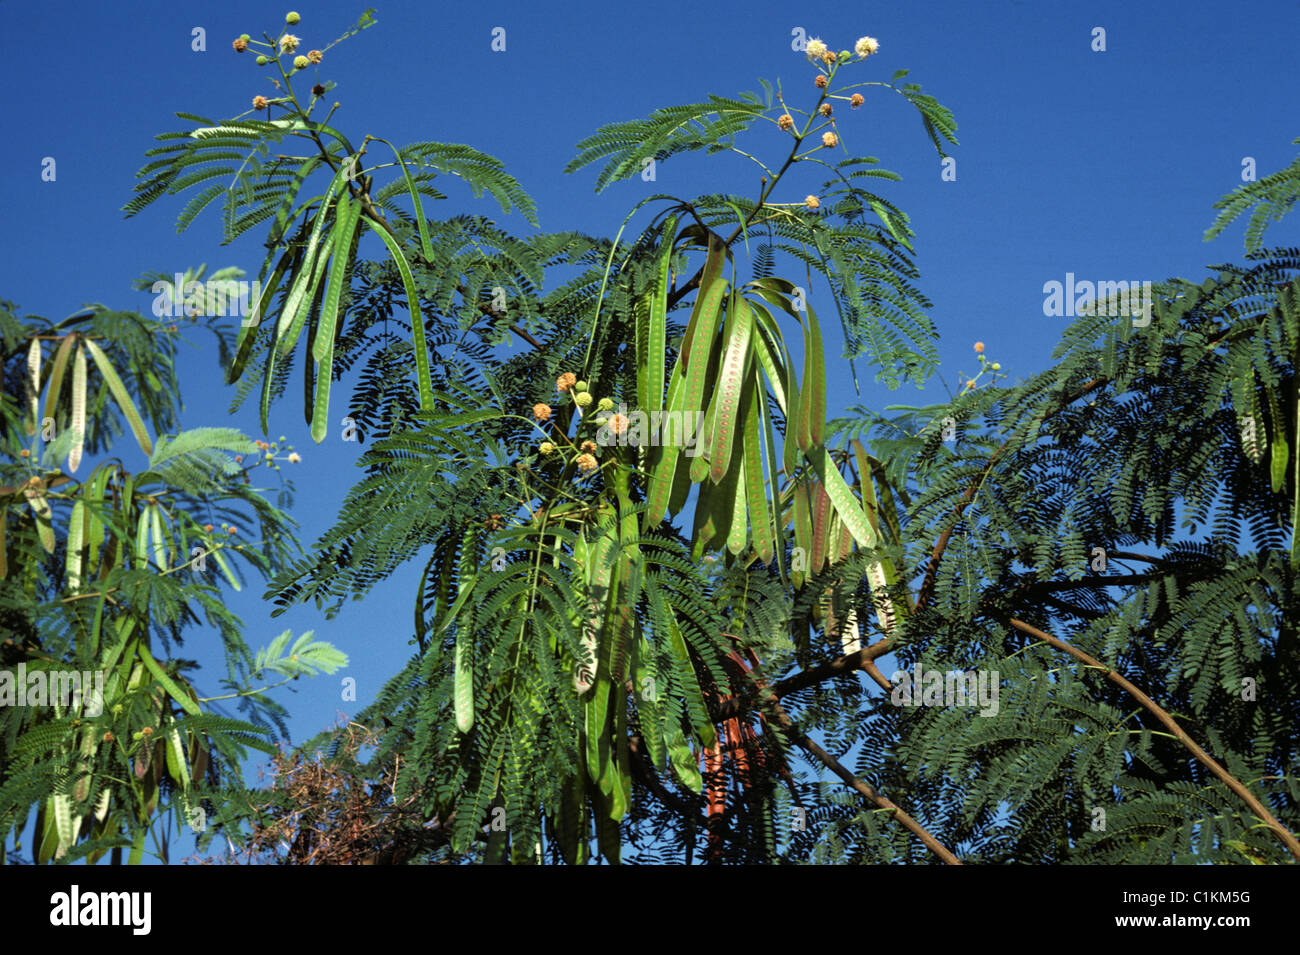 Mimosa or Acacia tree in flower and with very long seedpods Stock Photo